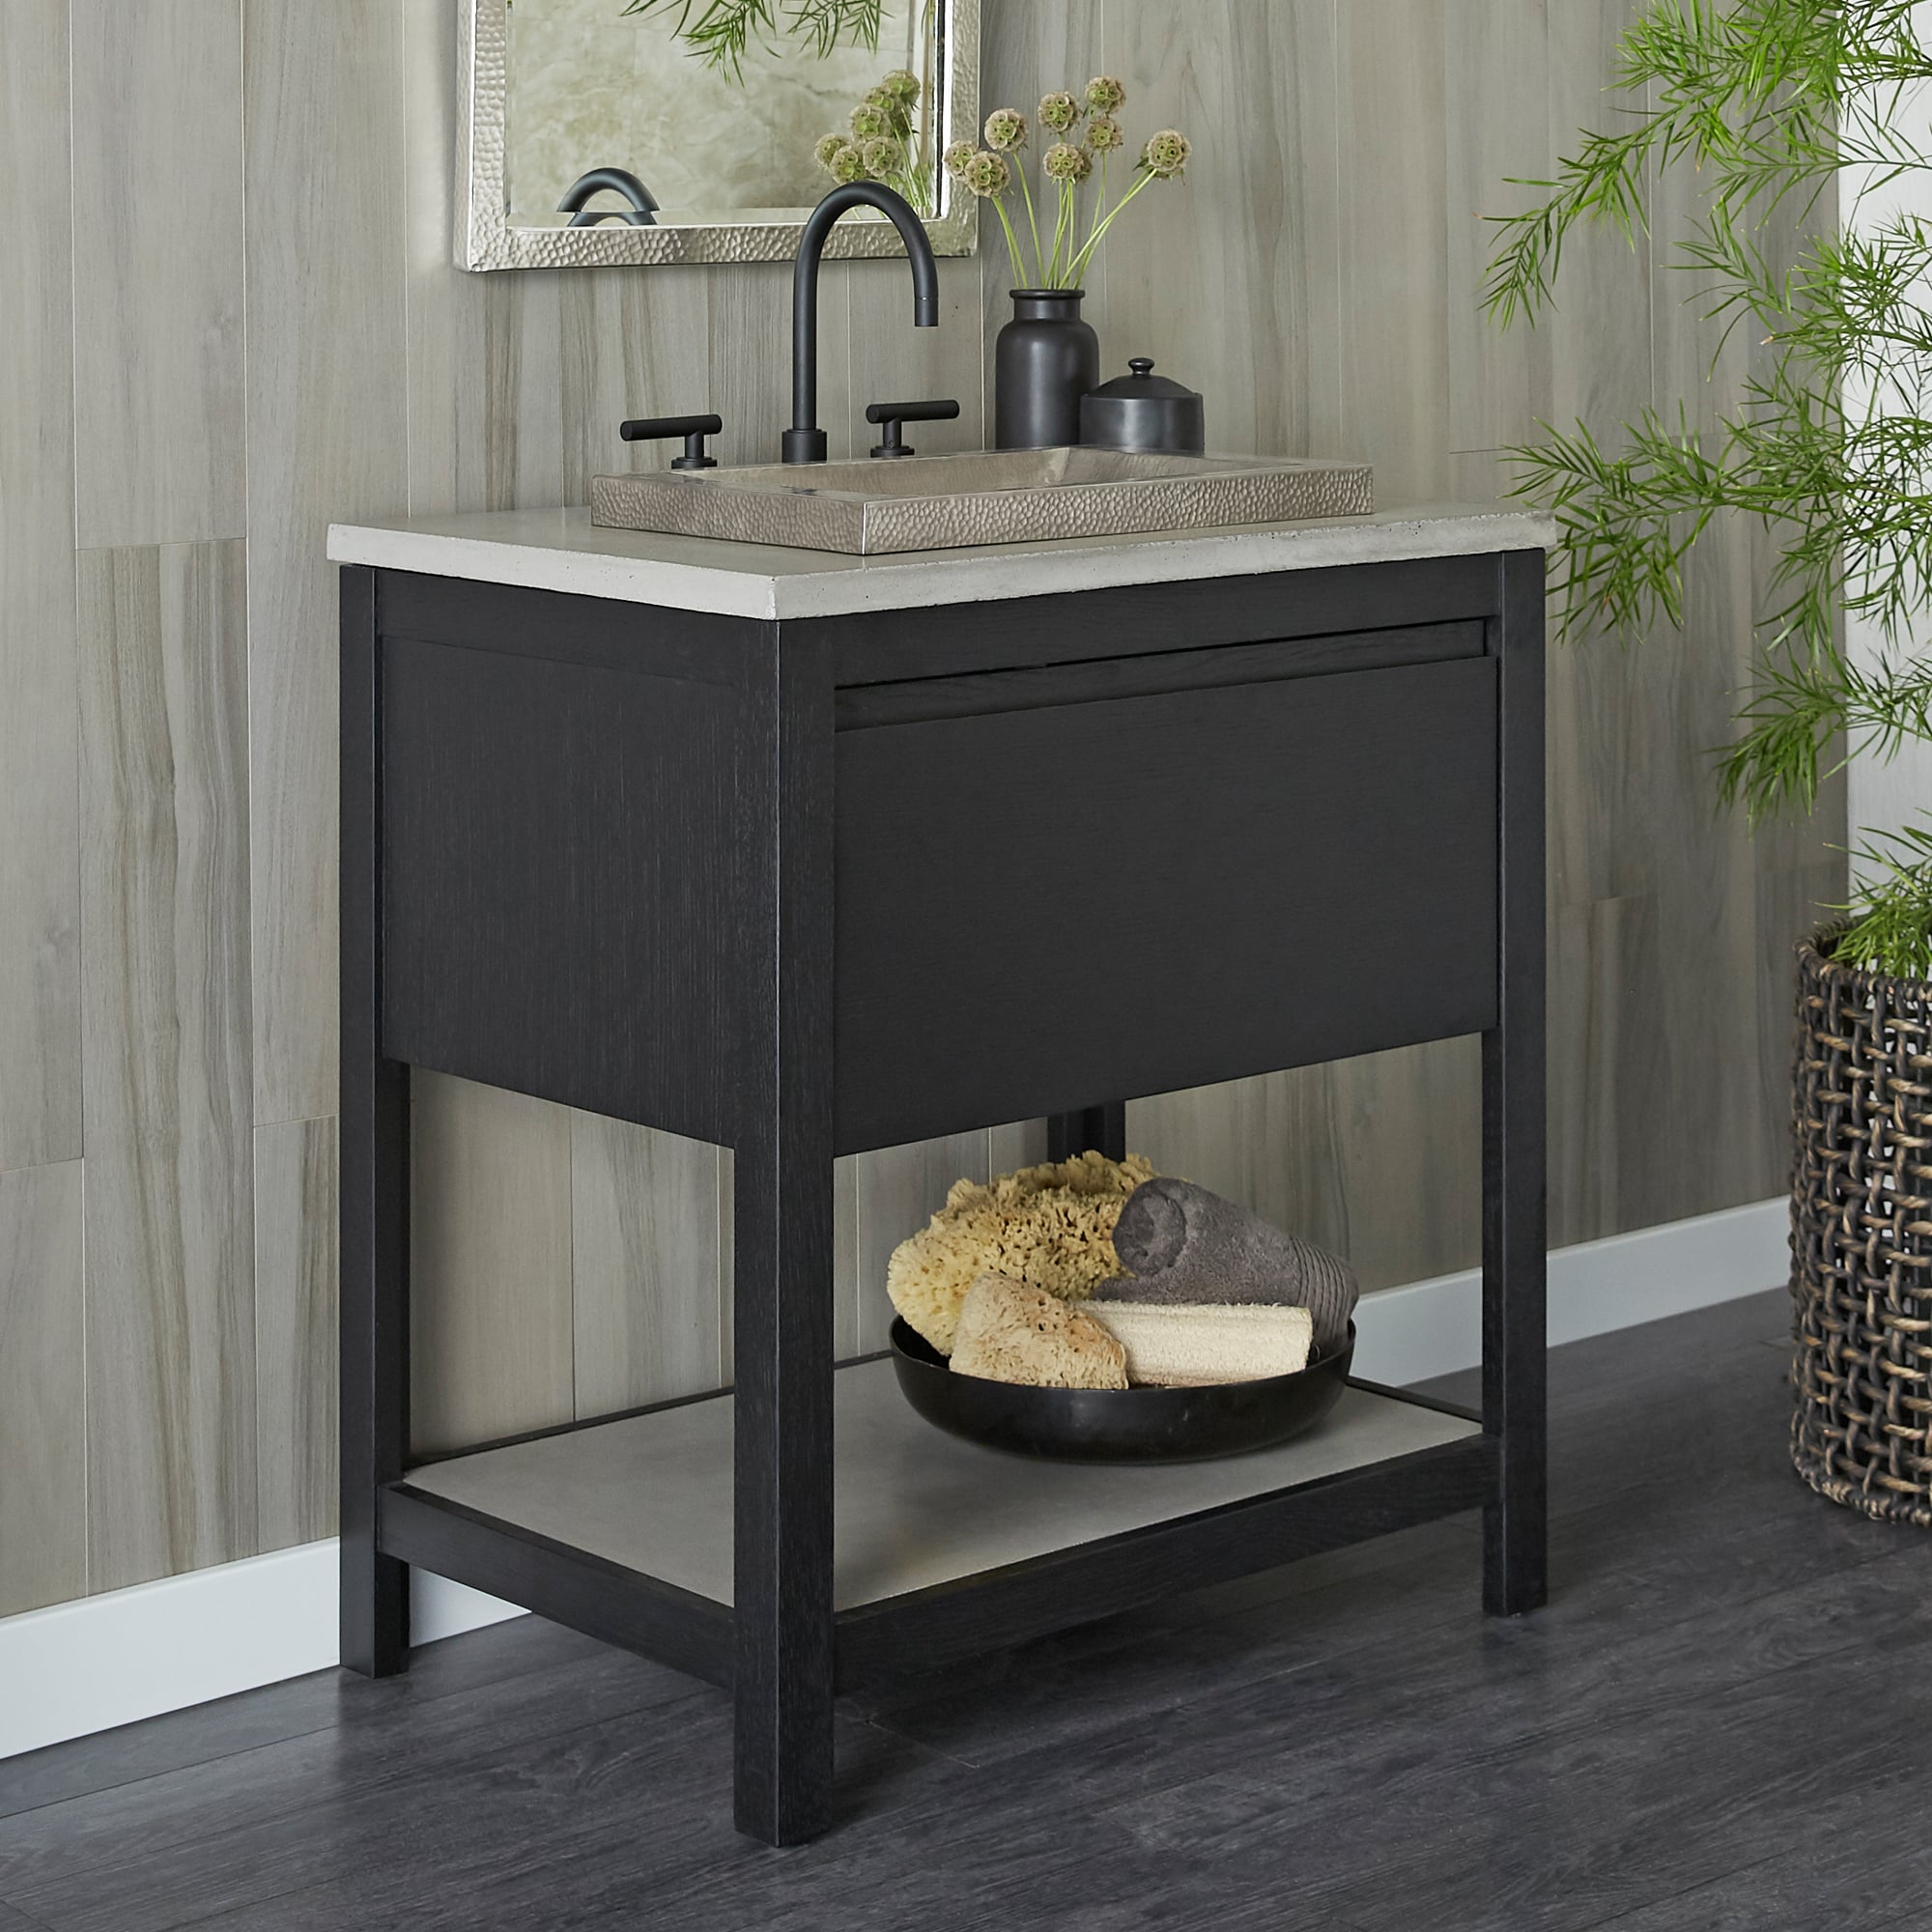 Native Trails 30 Solace Vanity in Midnight Oak with Ash Shelf, VNO308-A